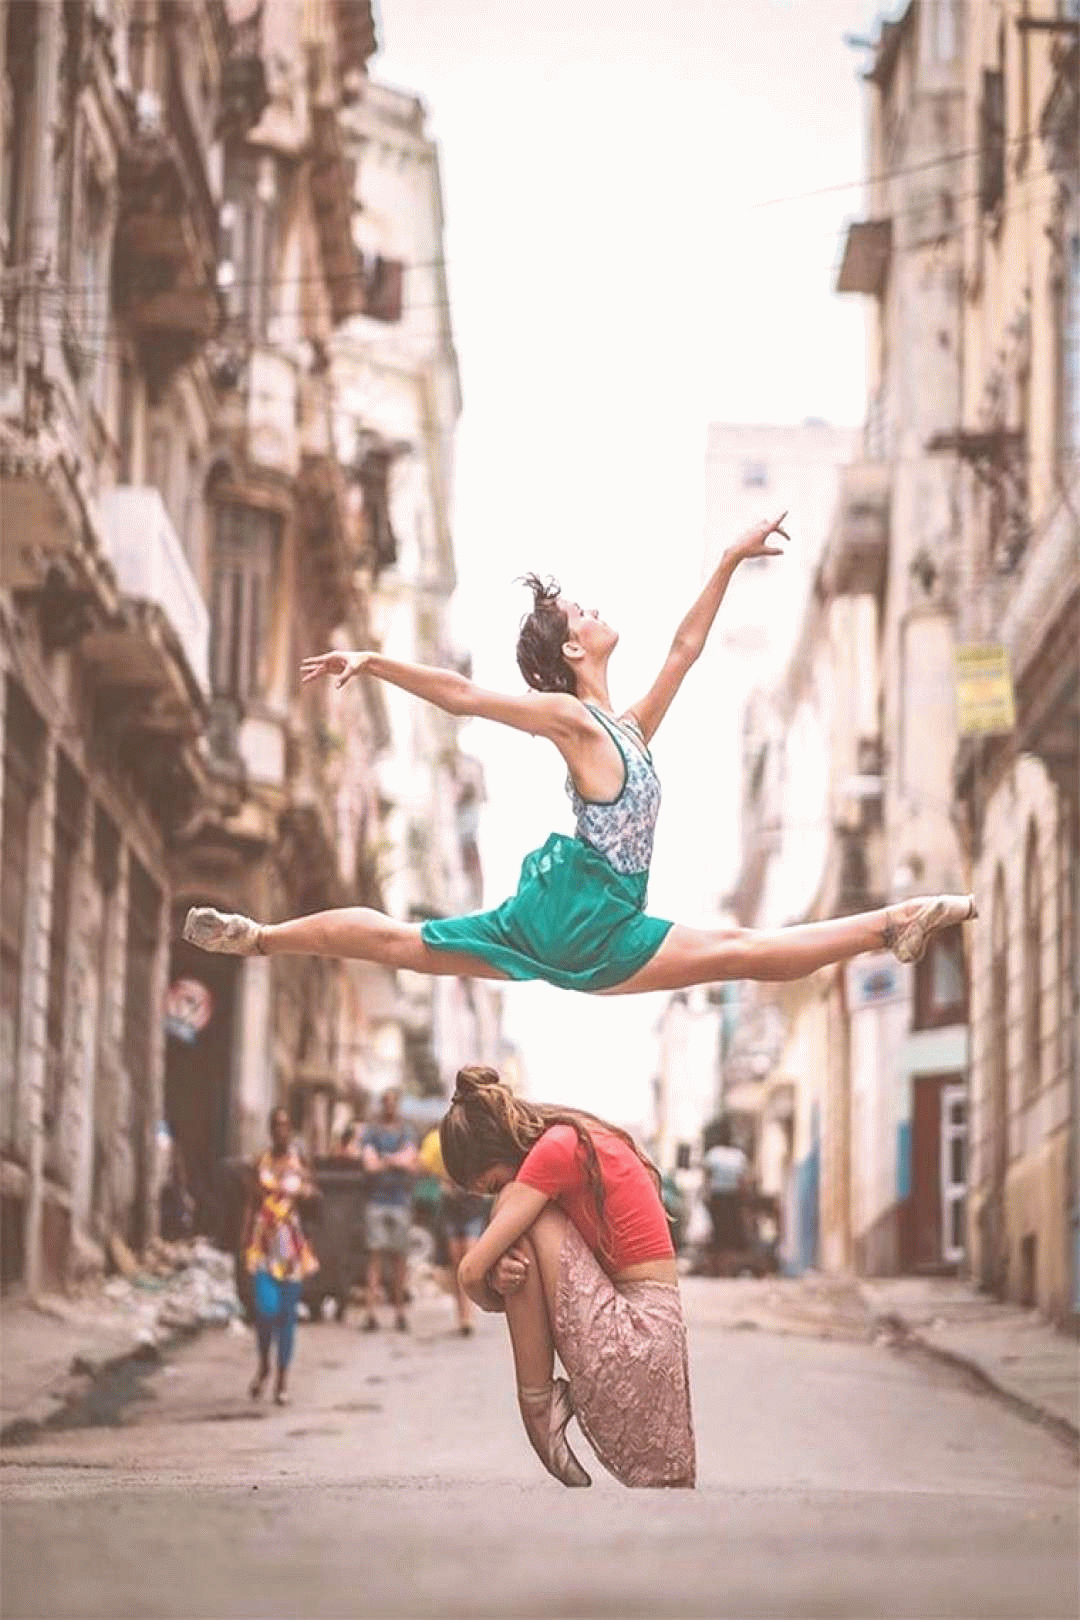 dancers on the streets of cuba a powerful series photos by omar robles stree dance poses ballet photography amazing